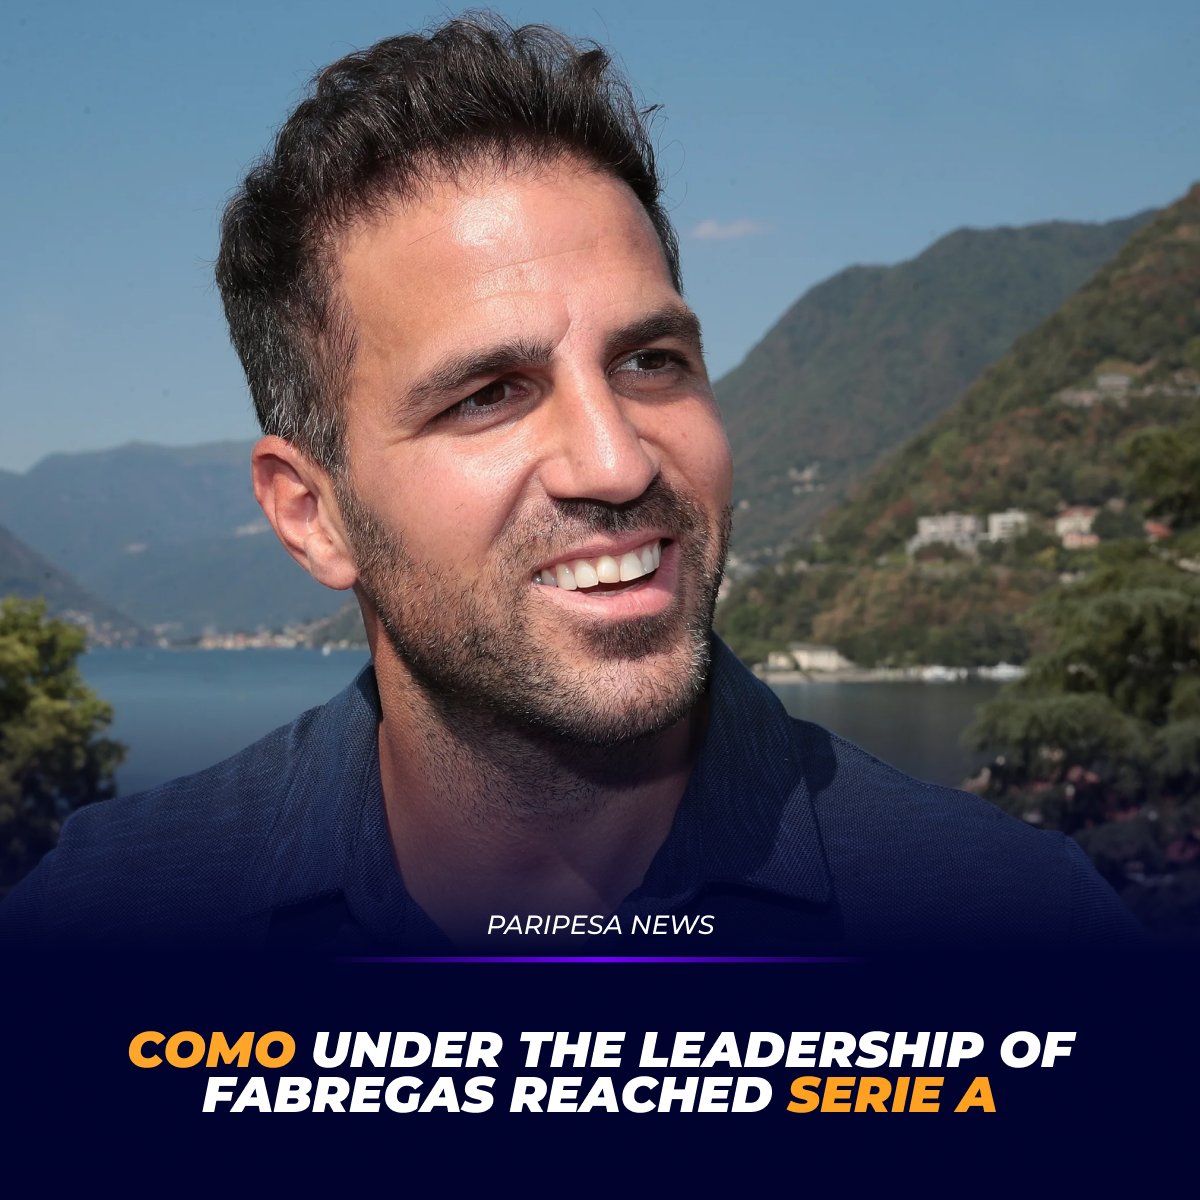 🇮🇹 Como, led by Cesc Fabregas, reached Serie A and will play there for the first time since 2003. 🤔 Is there a new top coach on the horizon? What do you think? #fabregas #como